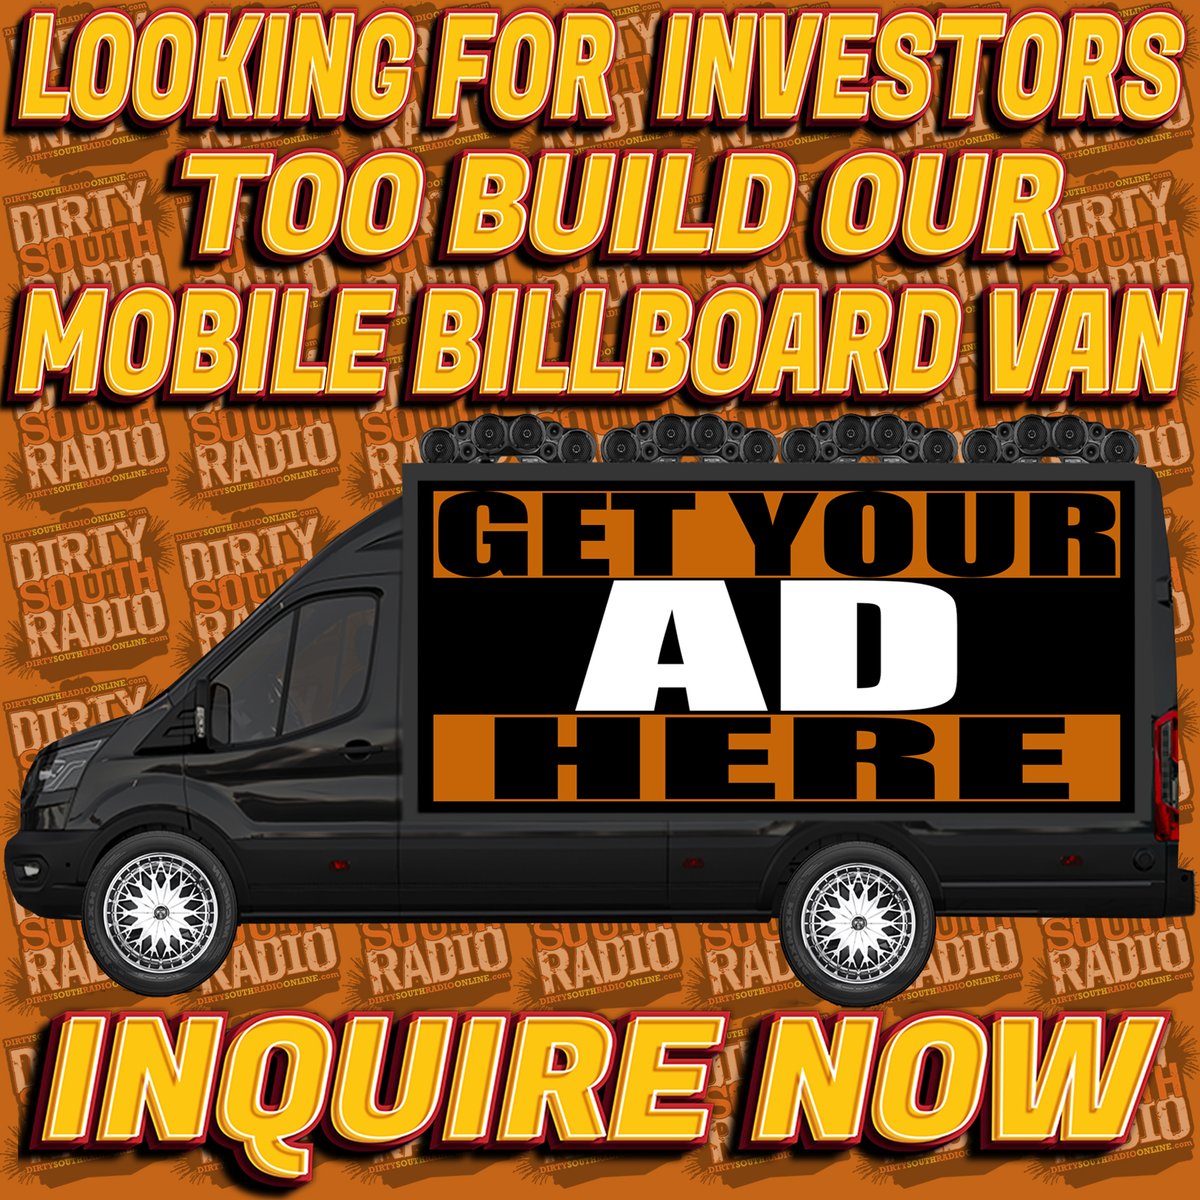 Dirty South Radio is seeking investors, donors, and supporters to assist in the development of our LED Mobile Billboard Van. If you believe you can contribute, click the link below to get involved. Here's our crowdfunding link: indiegogo.com/projects/inves…